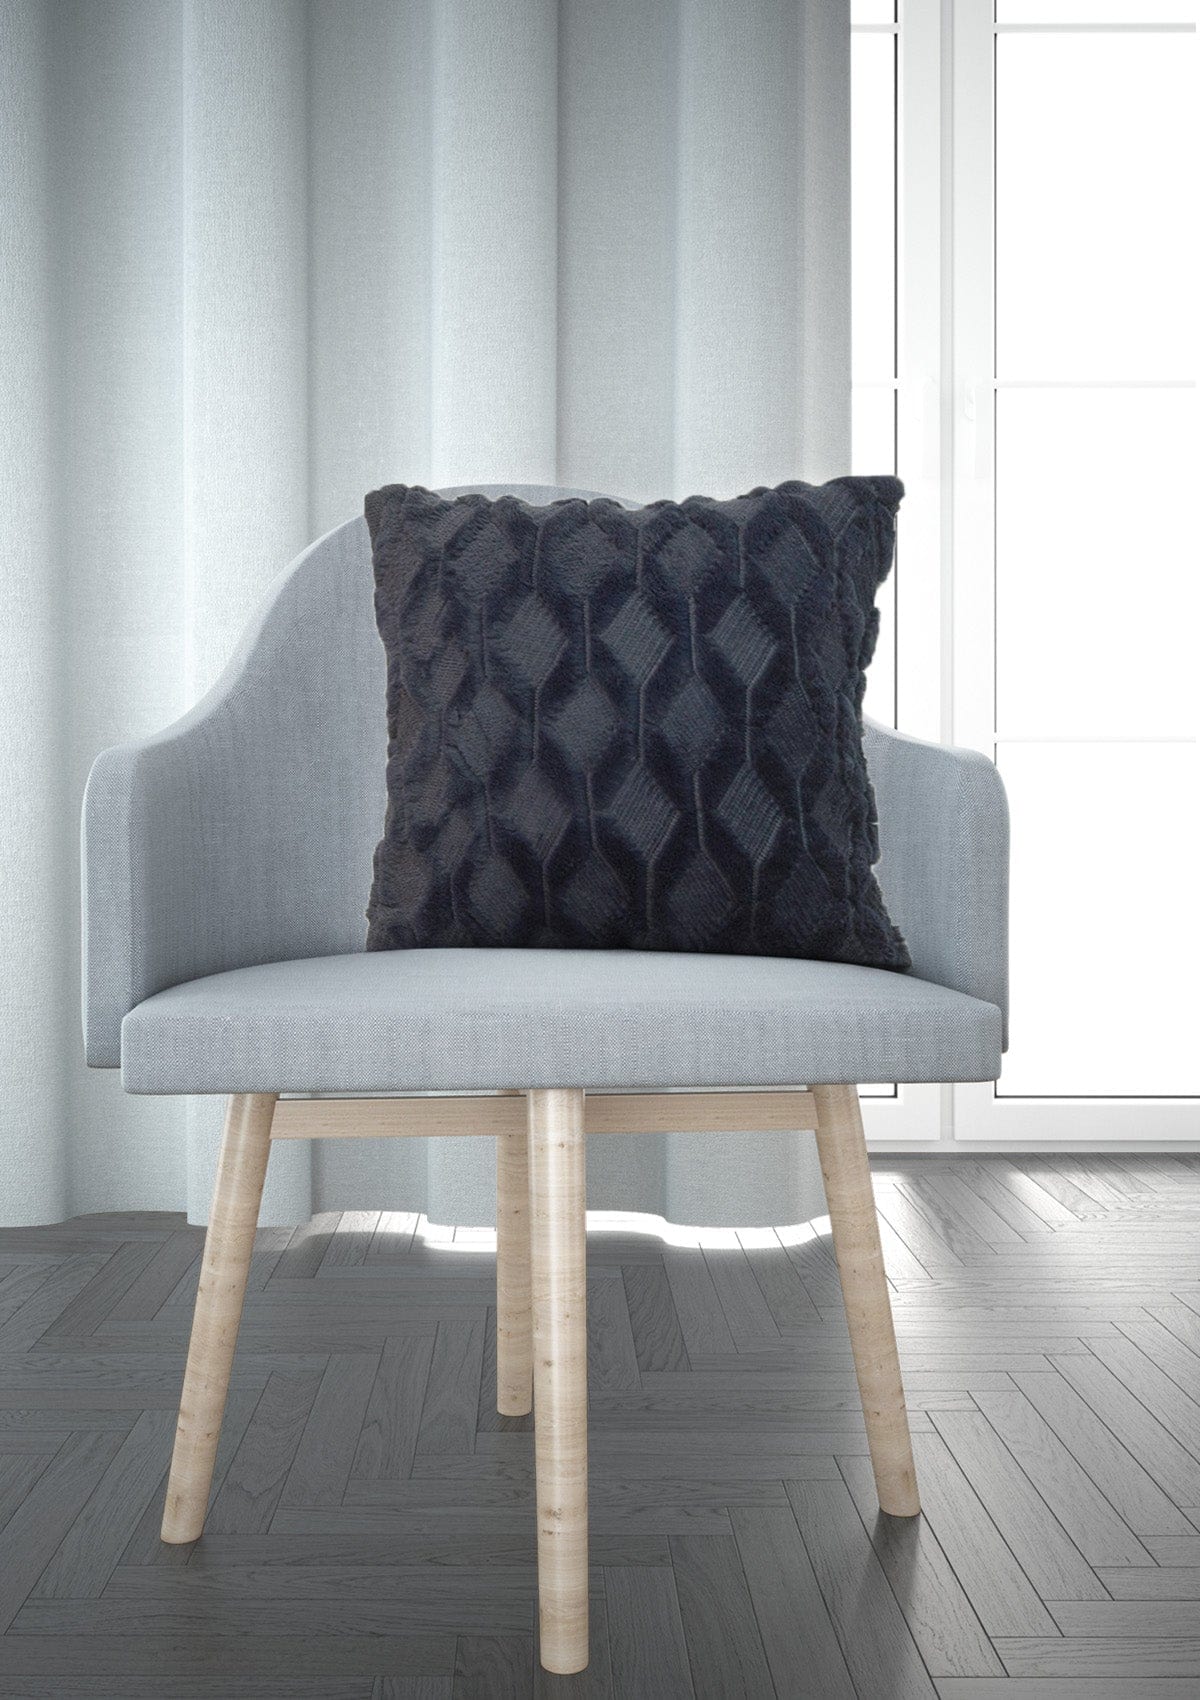 Blue Elegance Fluffy Cushion Covers | CovermyCushion 30x50cm / Navy / No thanks - cover only